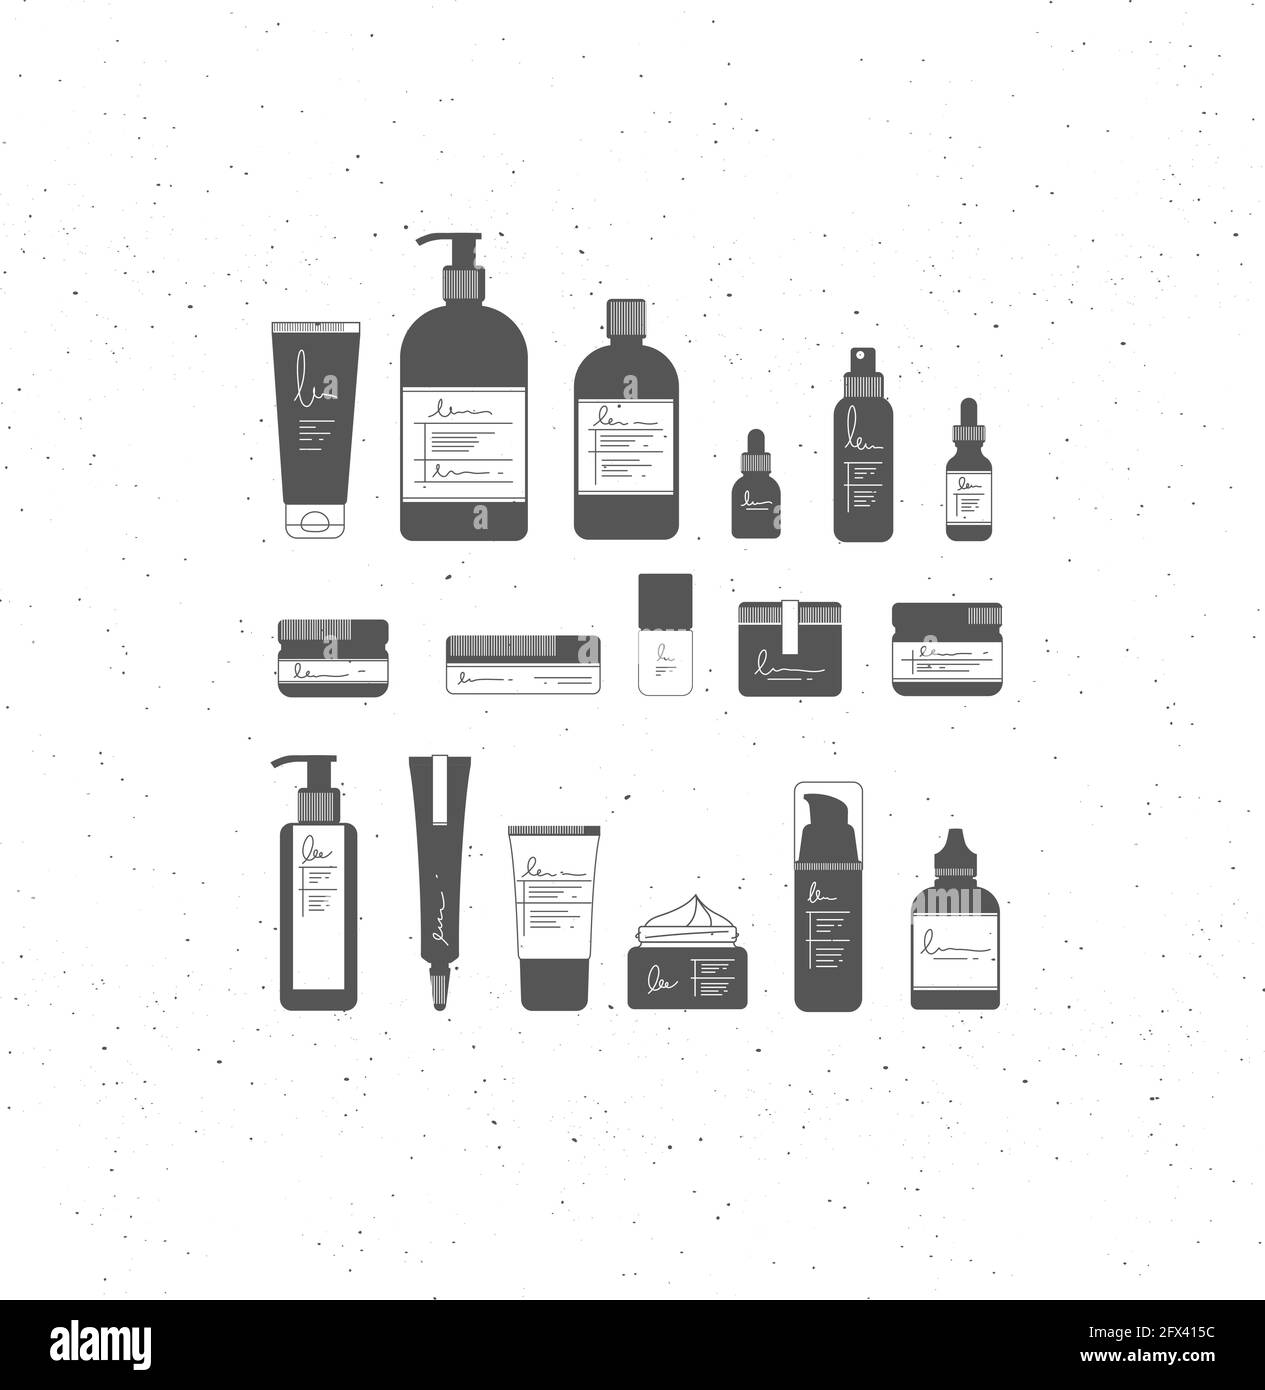 Set of cosmetic bottles in graphic style. Many containers for beauty and fashion products Stock Vector